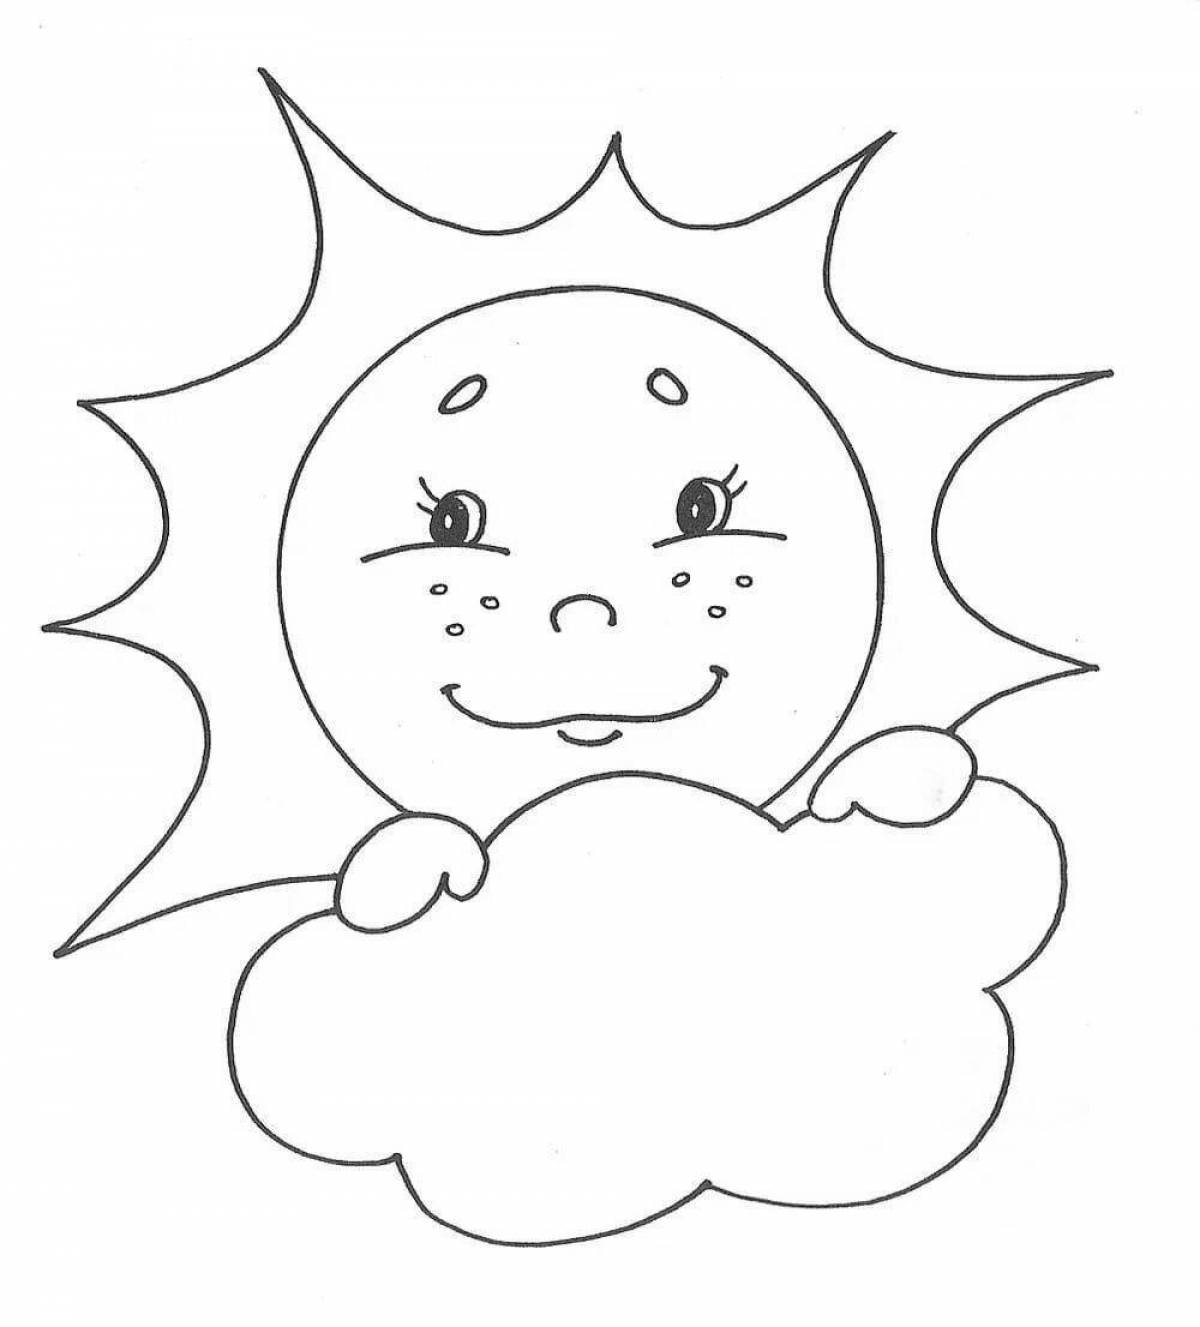 Coloring-wonder coloring page 2 младшая группа